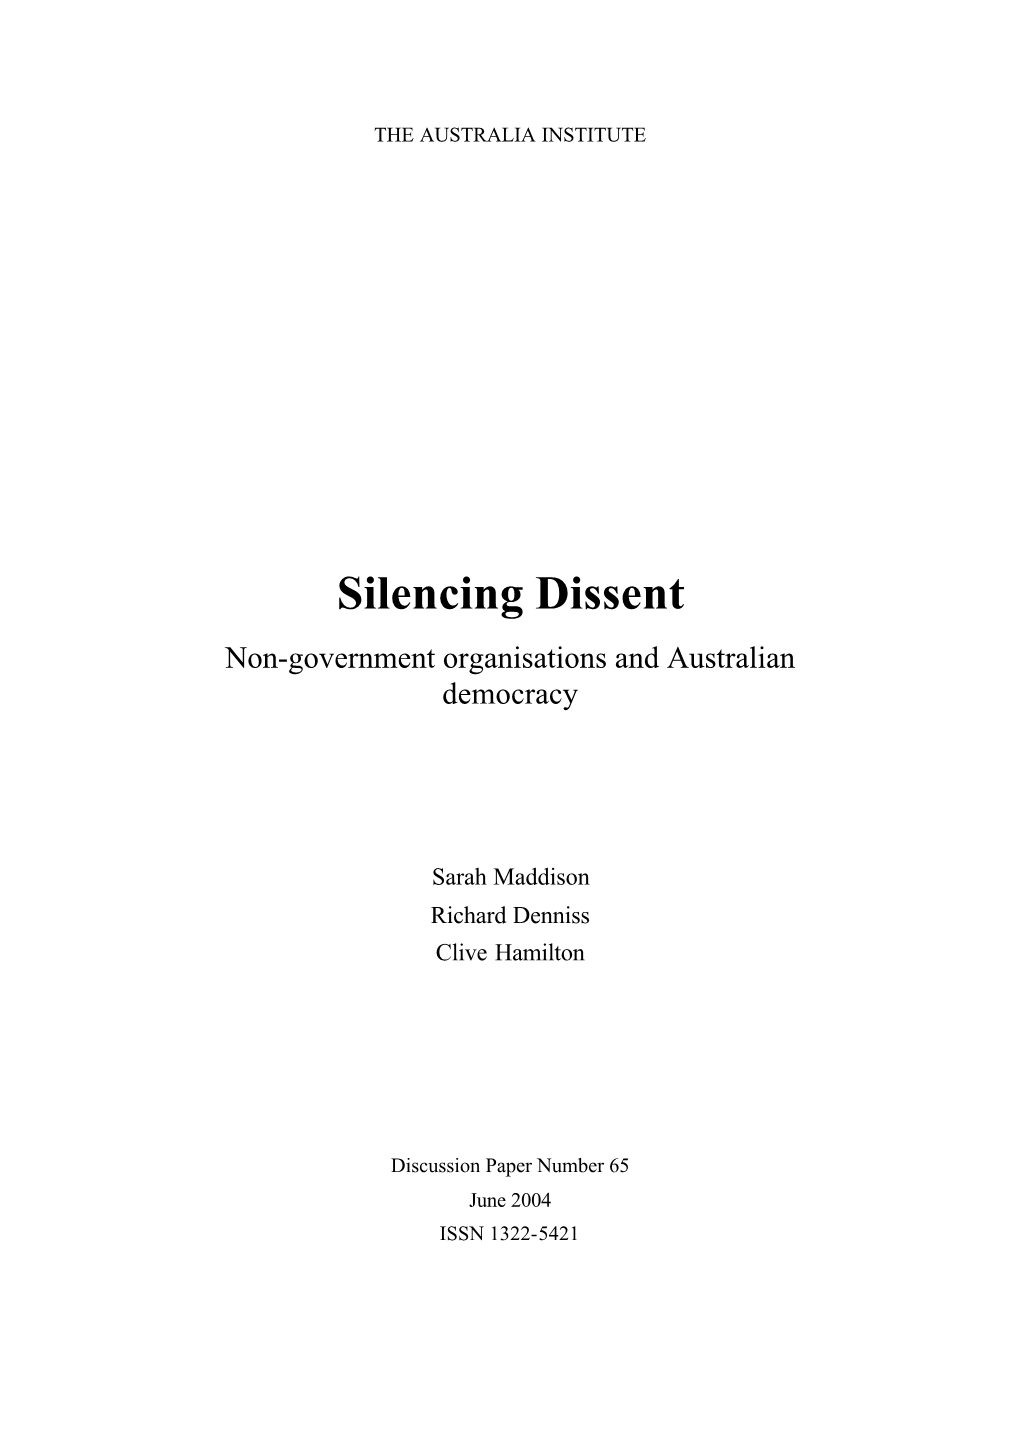 Silencing Dissent Non-Government Organisations and Australian Democracy